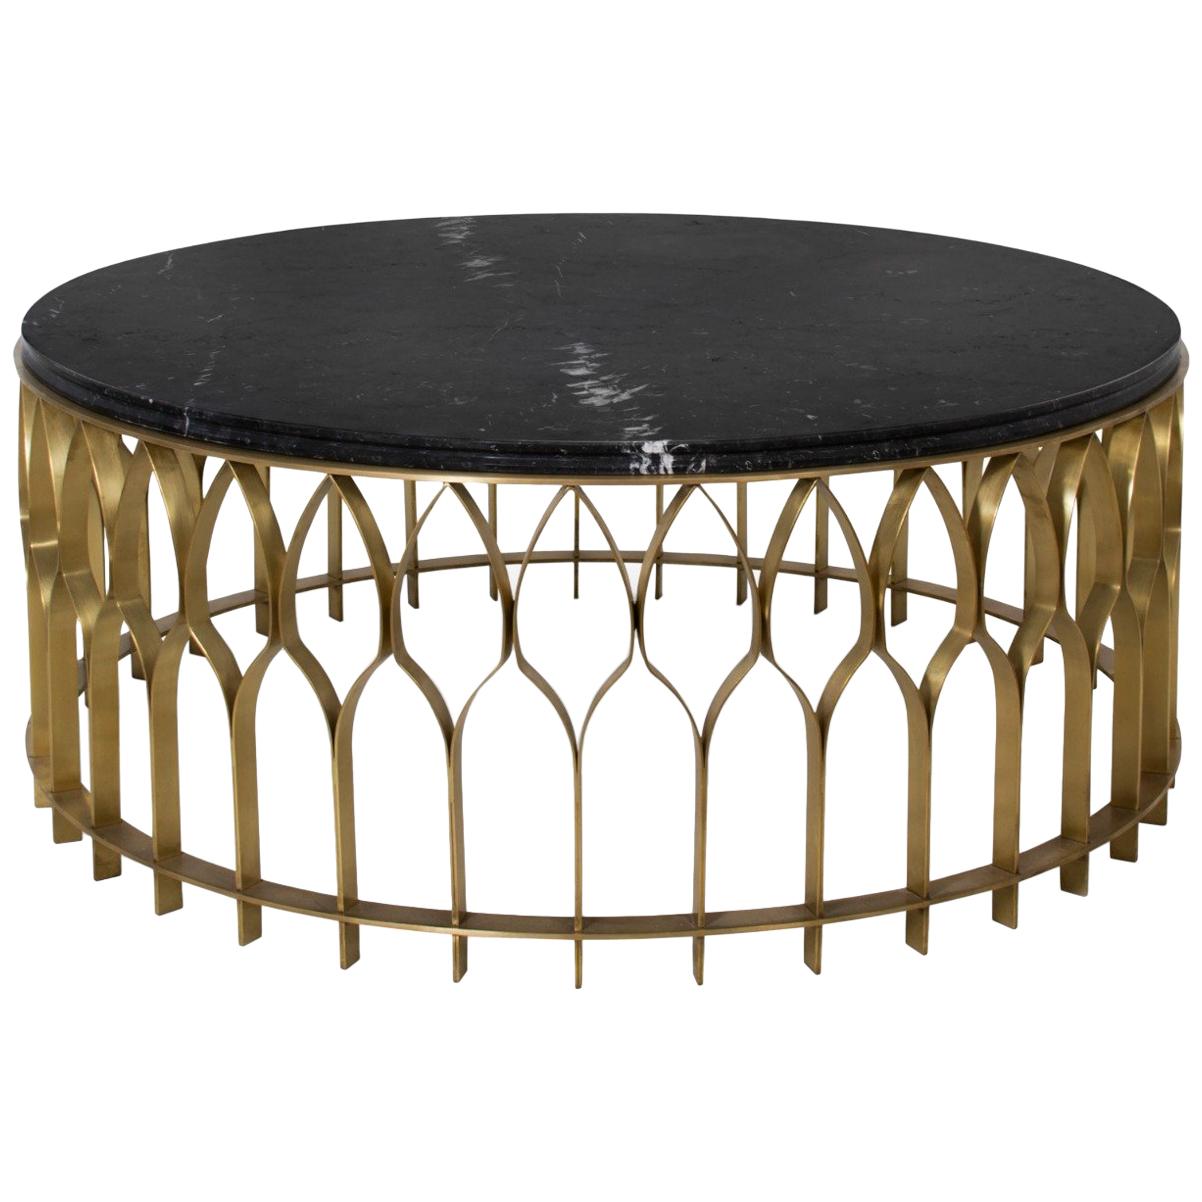 Mecca I Center Table with Black Marble Top and Brass Base by Brabbu For Sale